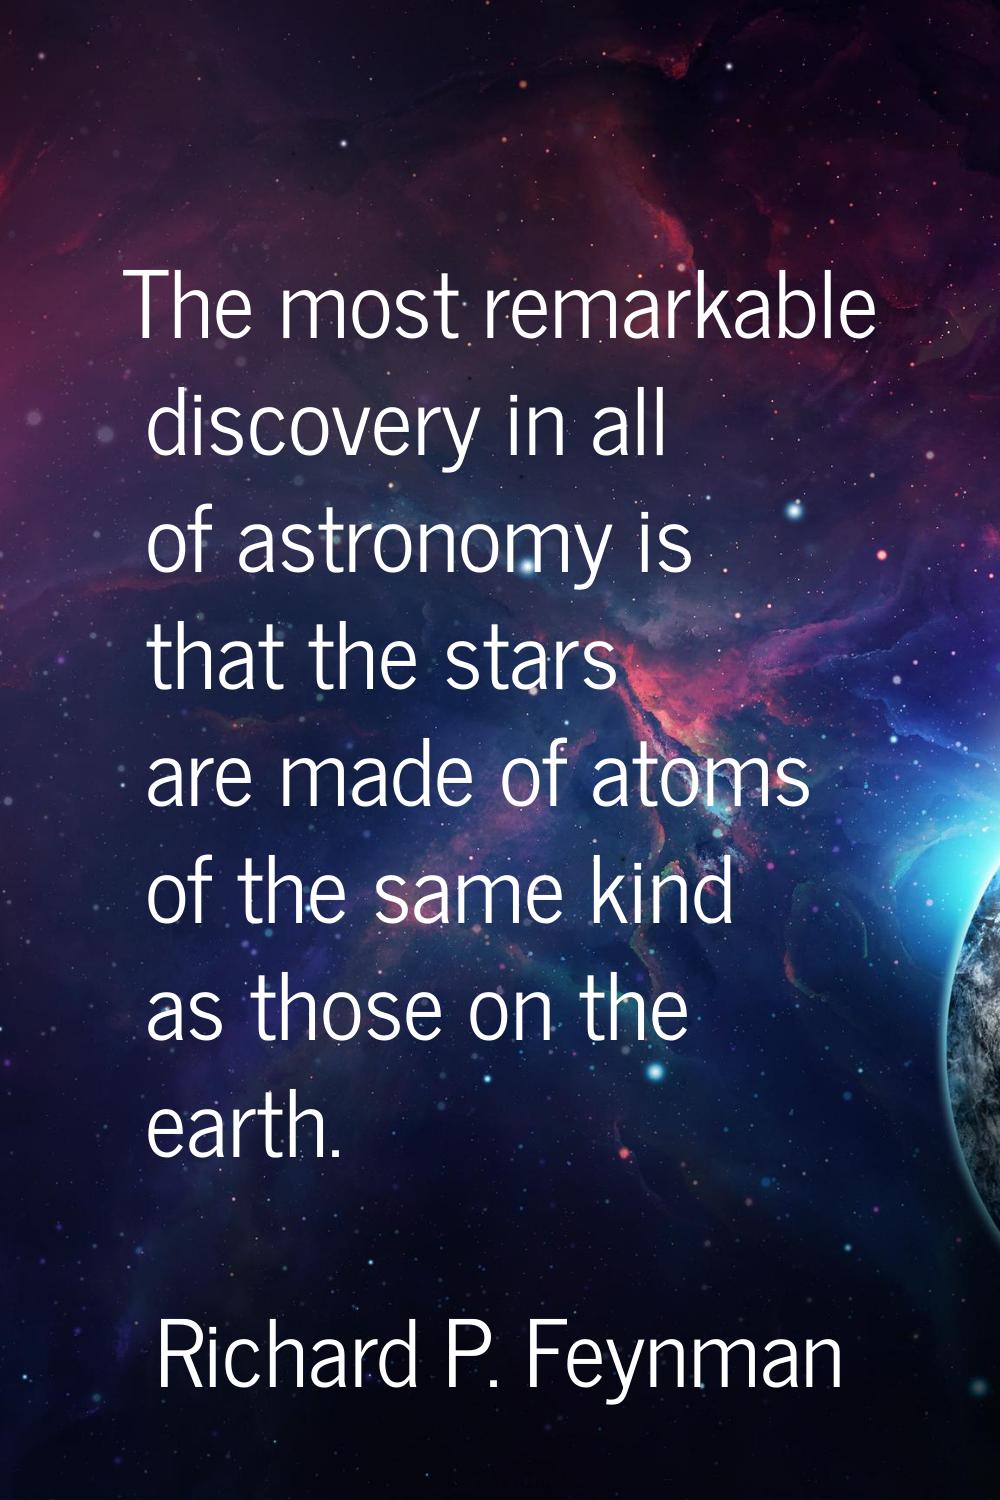 The most remarkable discovery in all of astronomy is that the stars are made of atoms of the same k